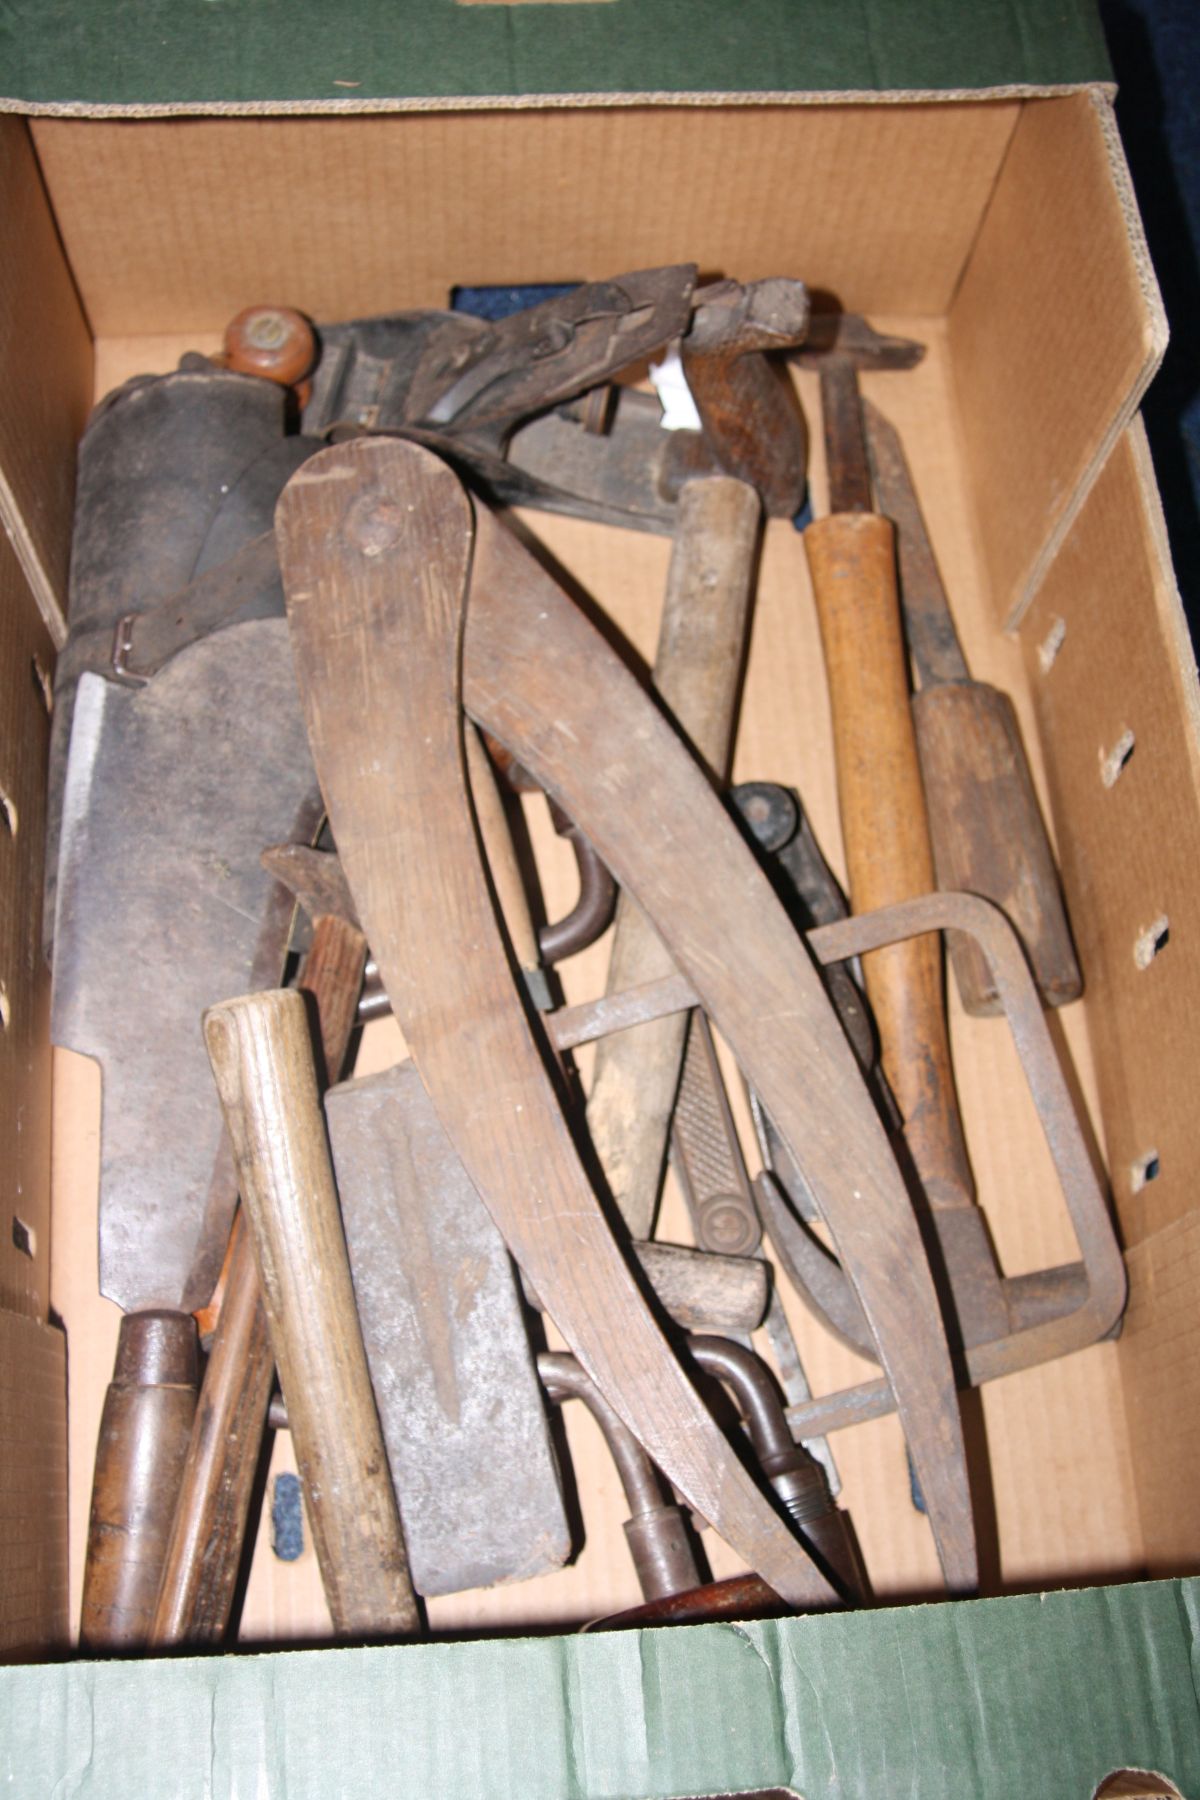 FIVE BOXES OF VARIOUS HAND TOOLS, to include planes, saws, hand sythes, files, chizels, hammers, - Image 7 of 14